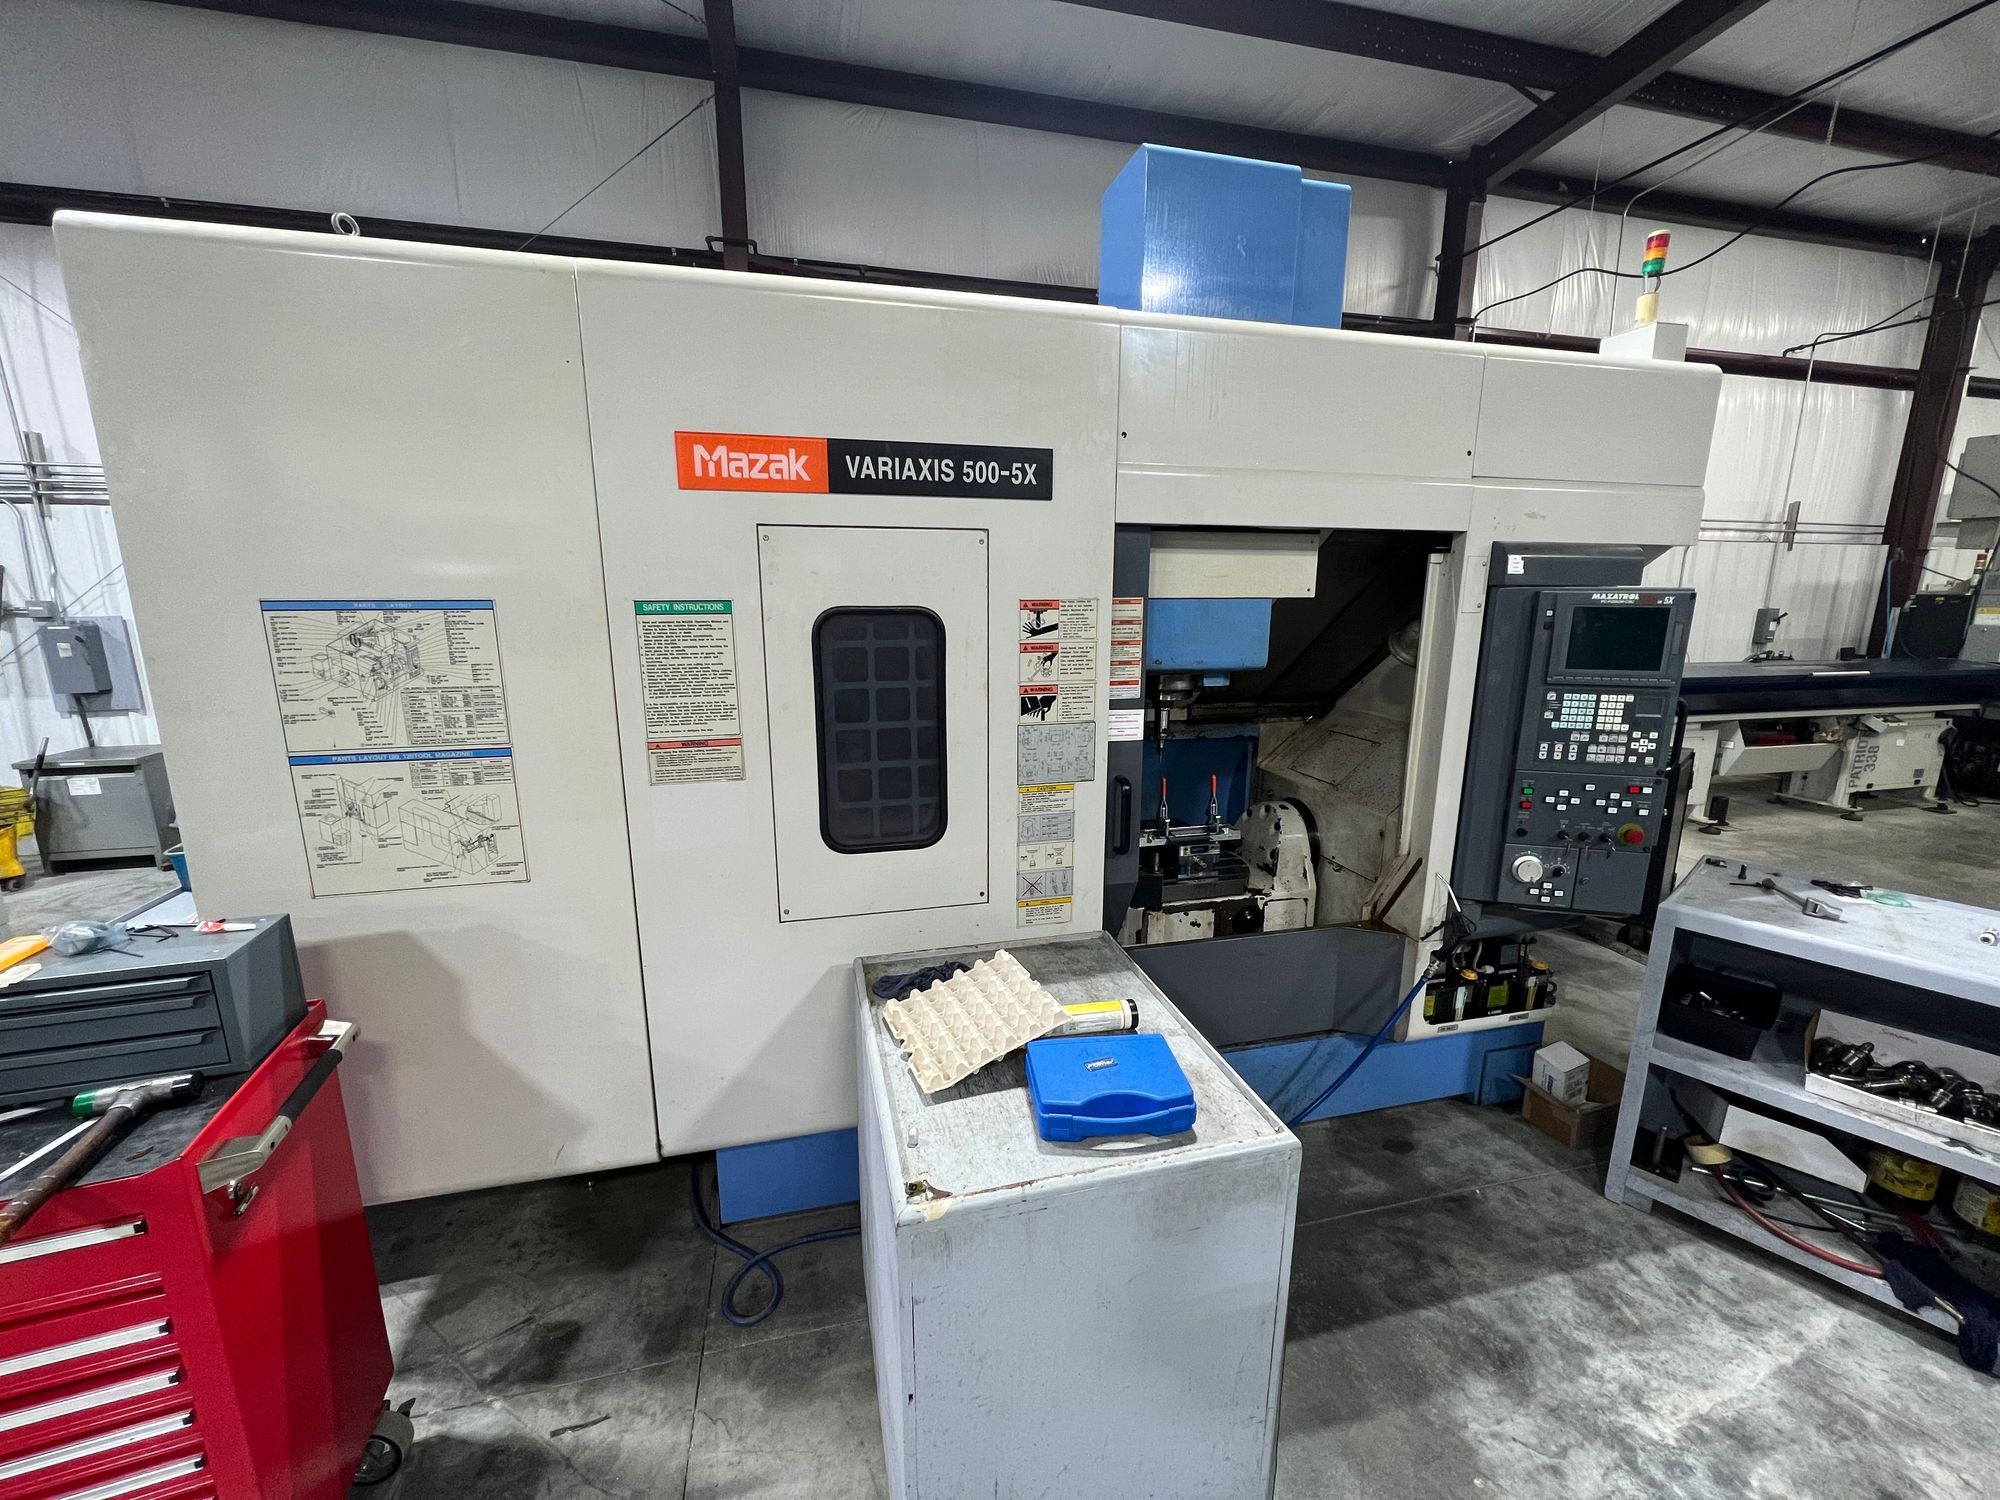 2002 MAZAK VARIAXIS 500-5X Vertical Machining Centers (5-Axis or More)